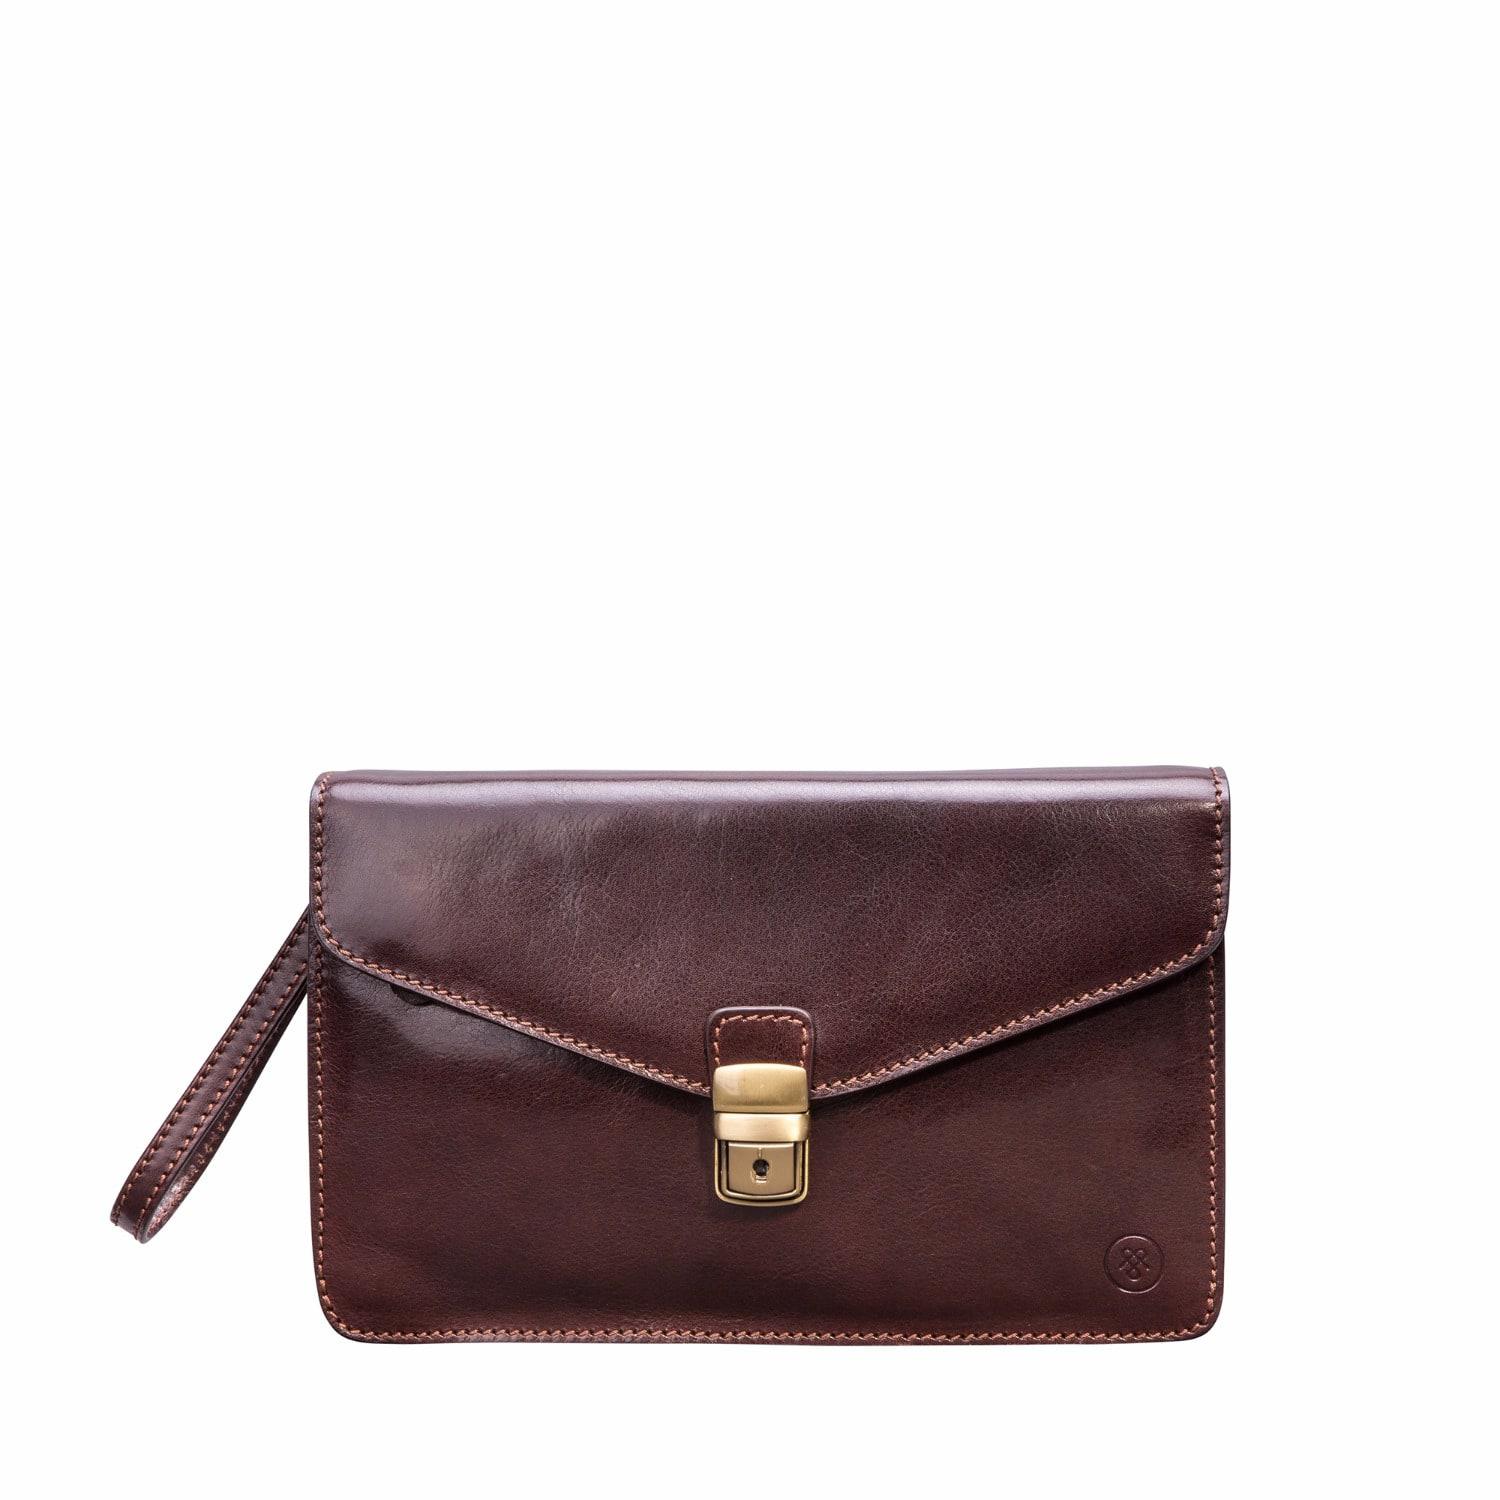 Maxwell Scott Bags The Santino Mens Leather Clutch Bag With Wrist Strap  Chocolate Brown for Men | Lyst